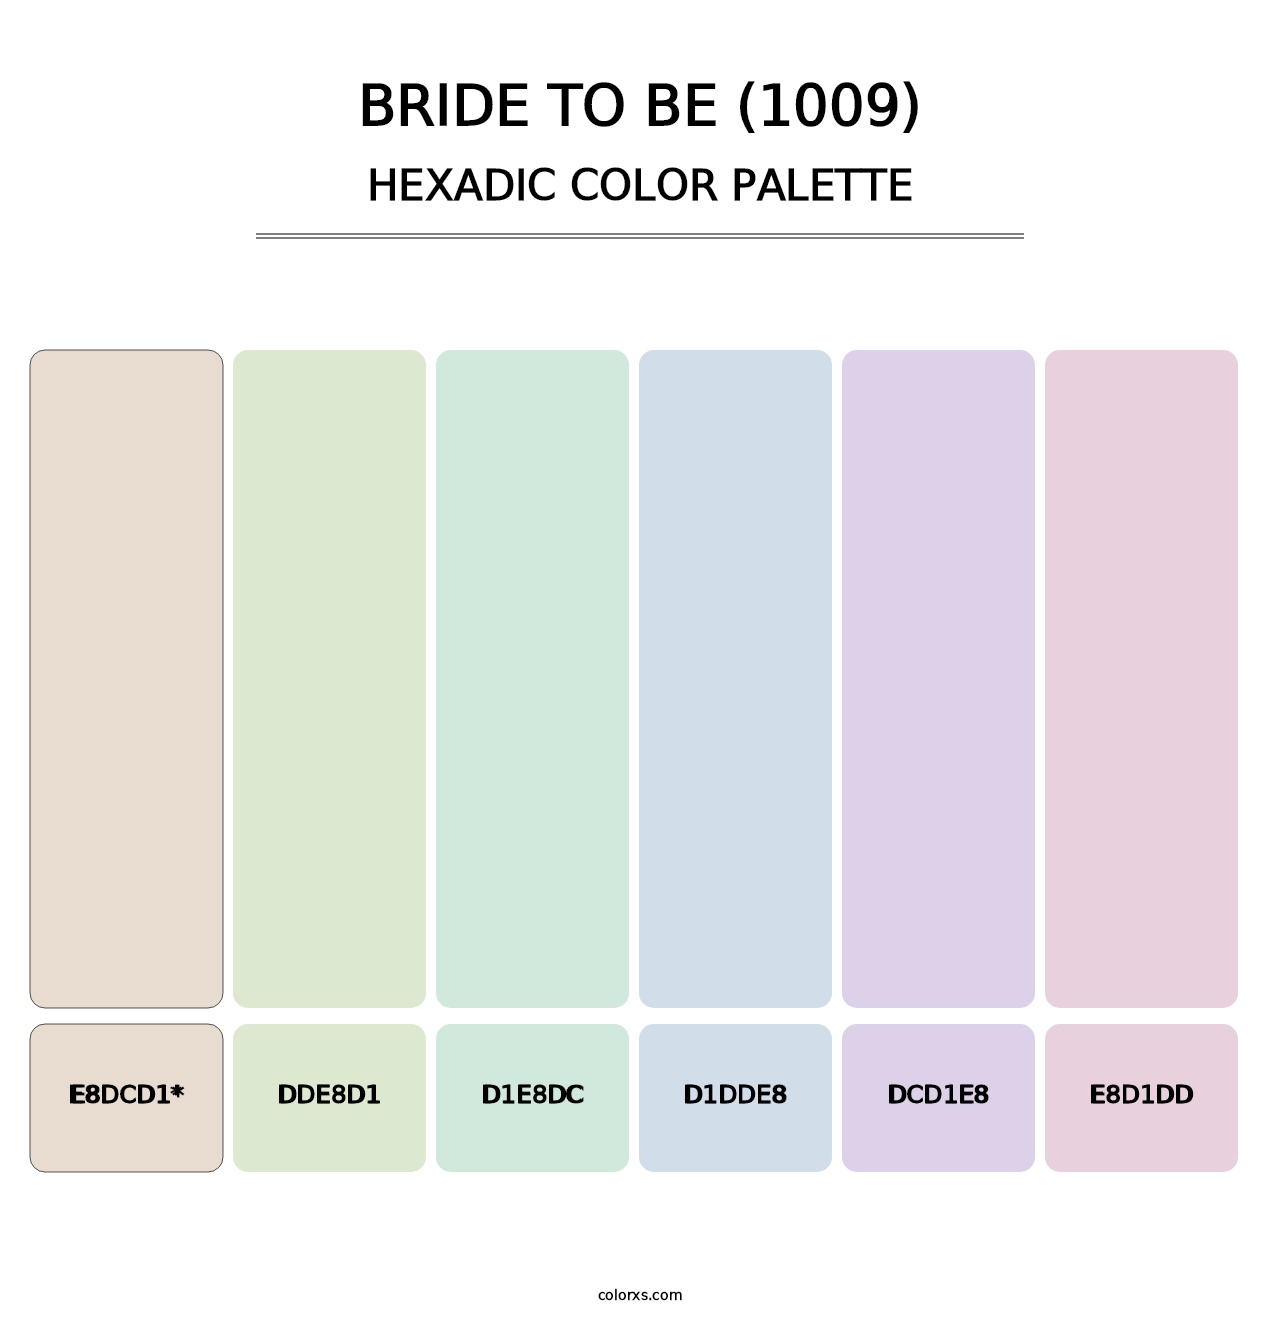 Bride To Be (1009) - Hexadic Color Palette